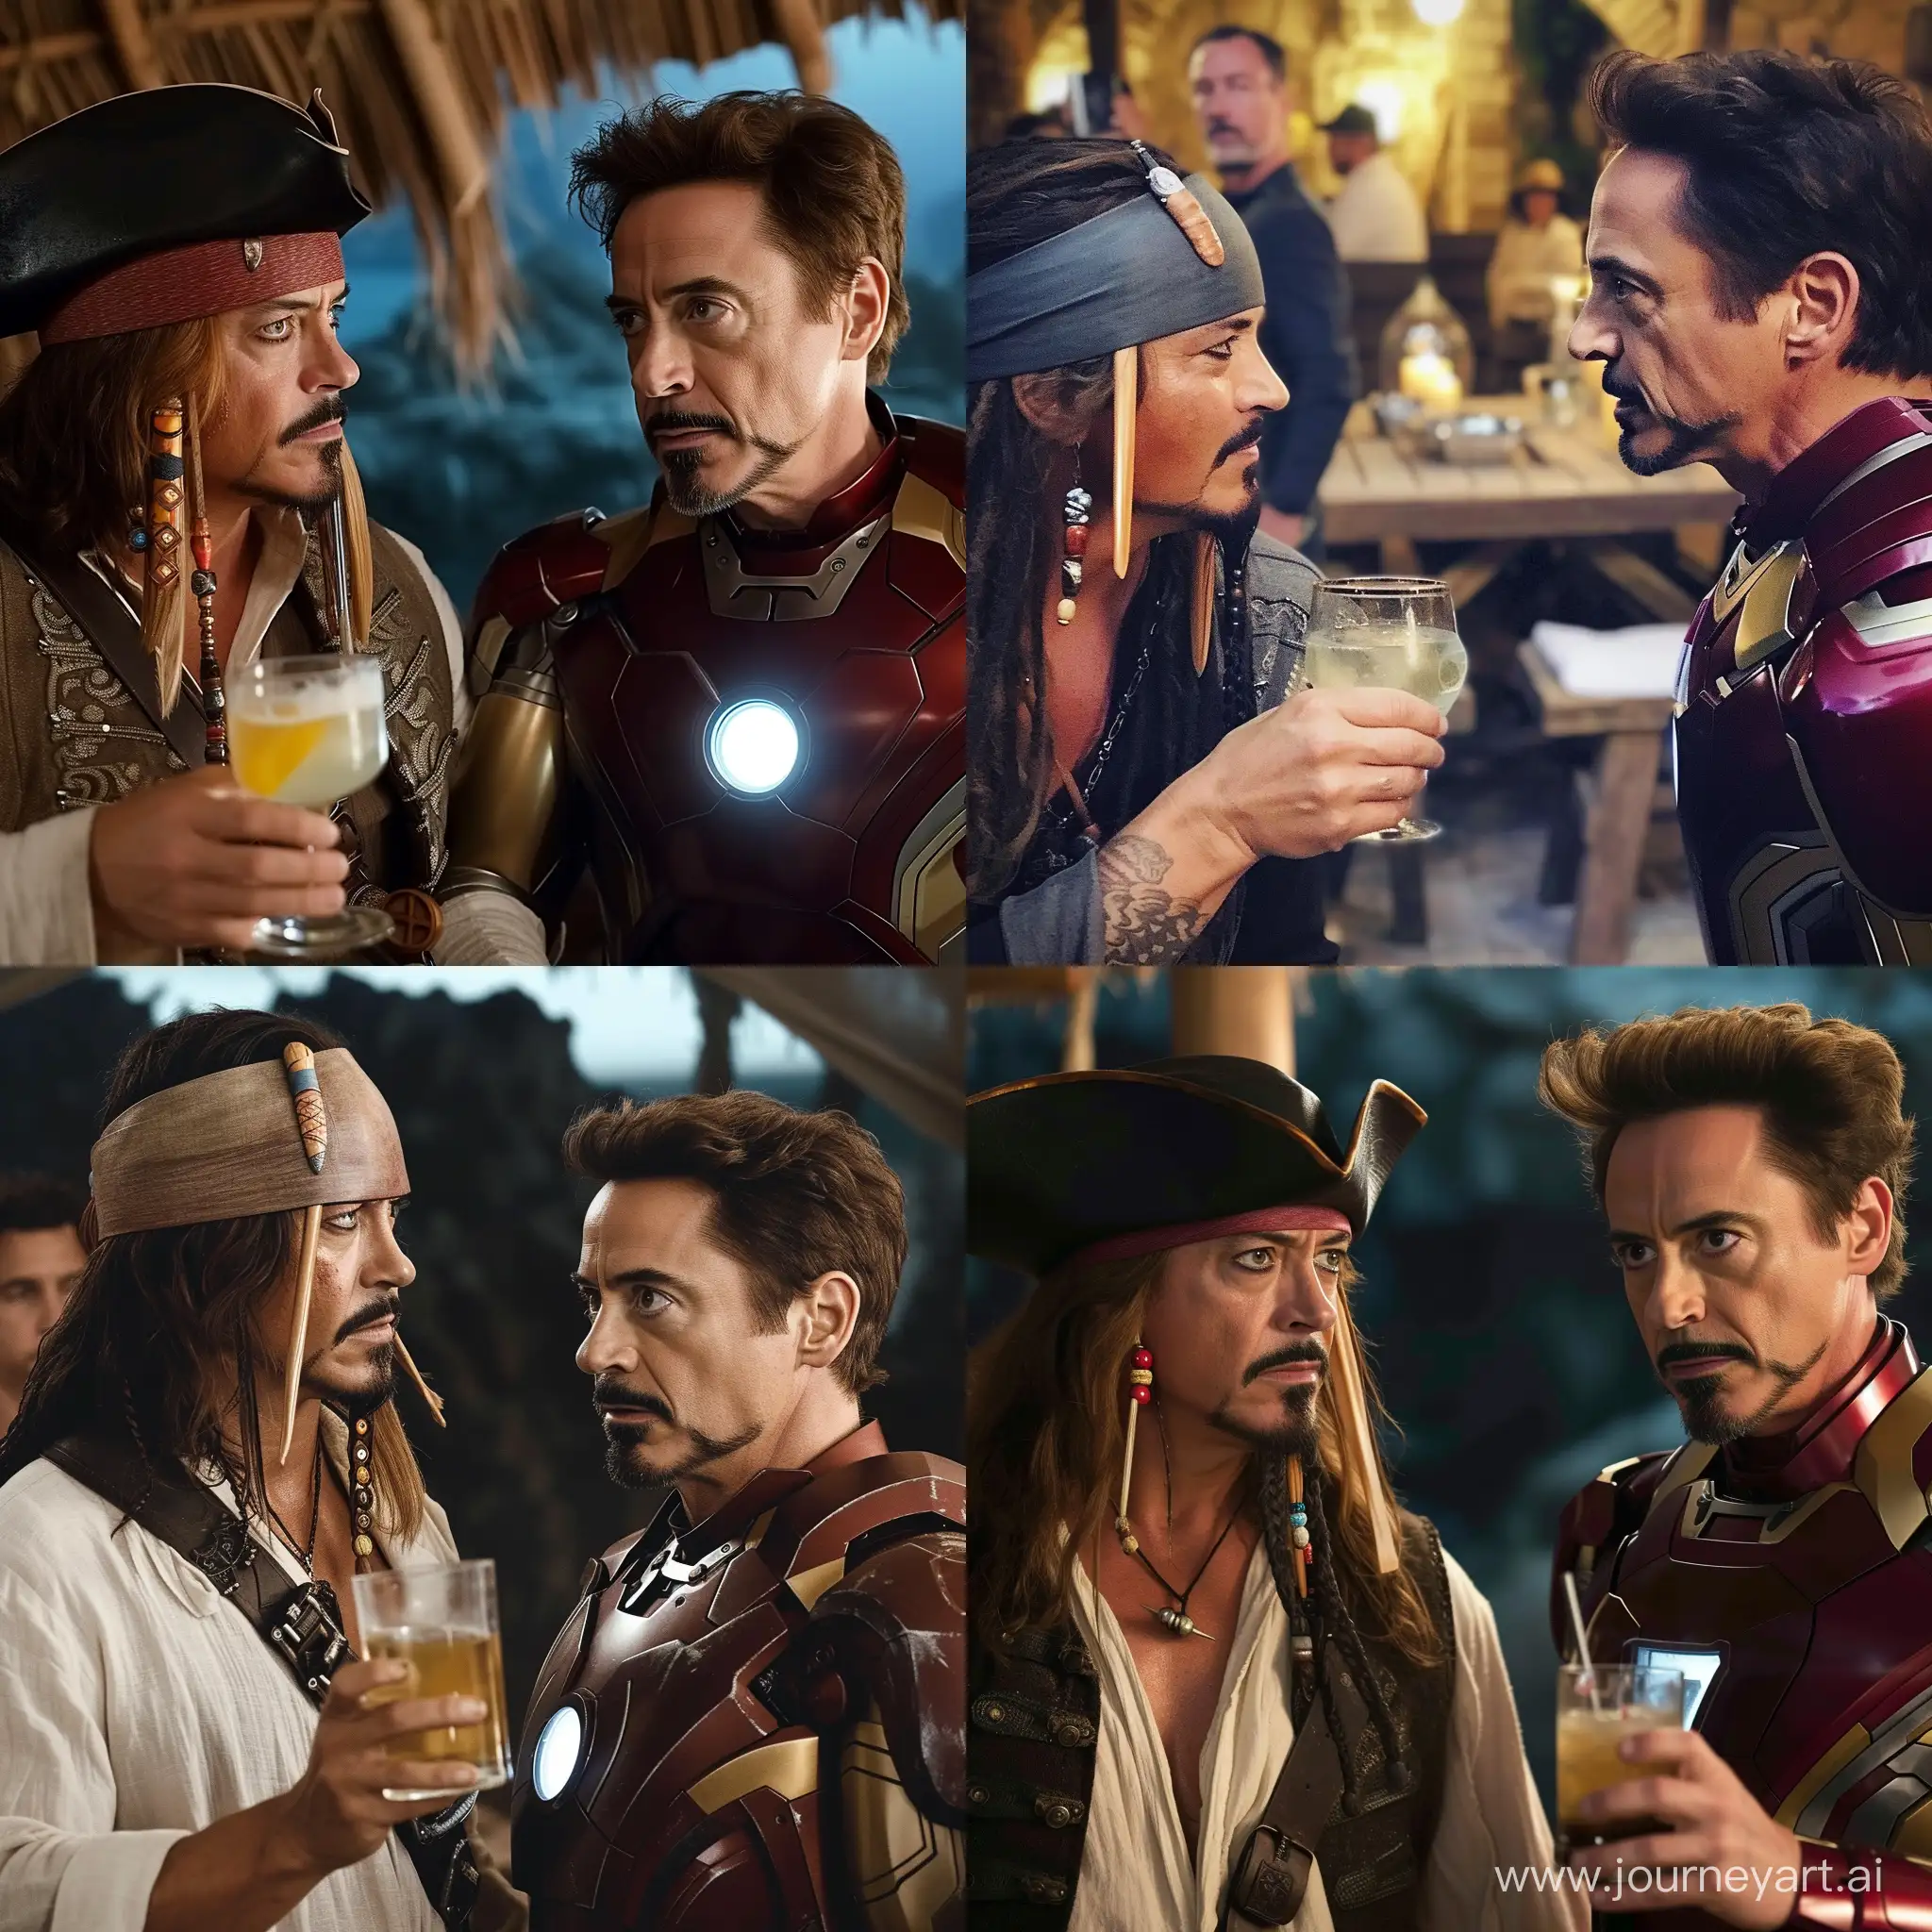 Jack Sparrow and Tony Stark have drinks together